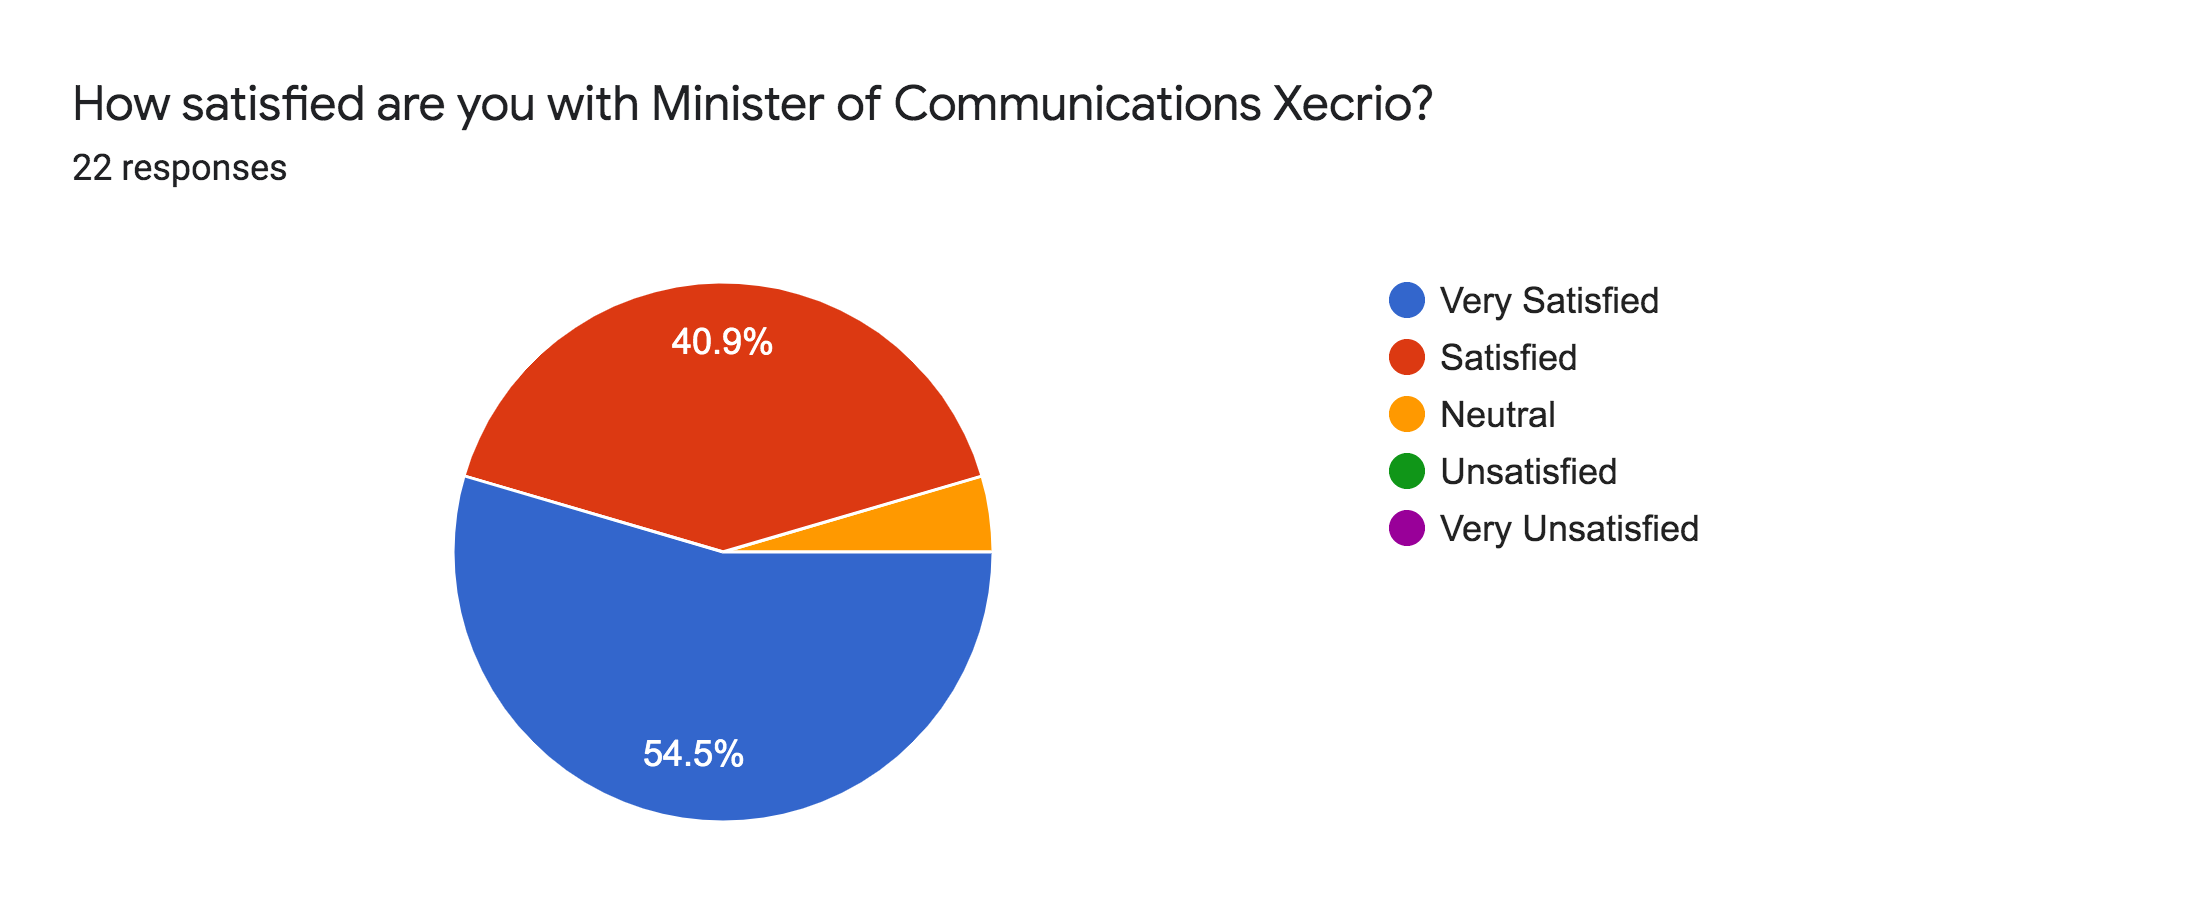 Forms response chart. Question title: How satisfied are you with Minister of Communications Xecrio?. Number of responses: 22 responses.